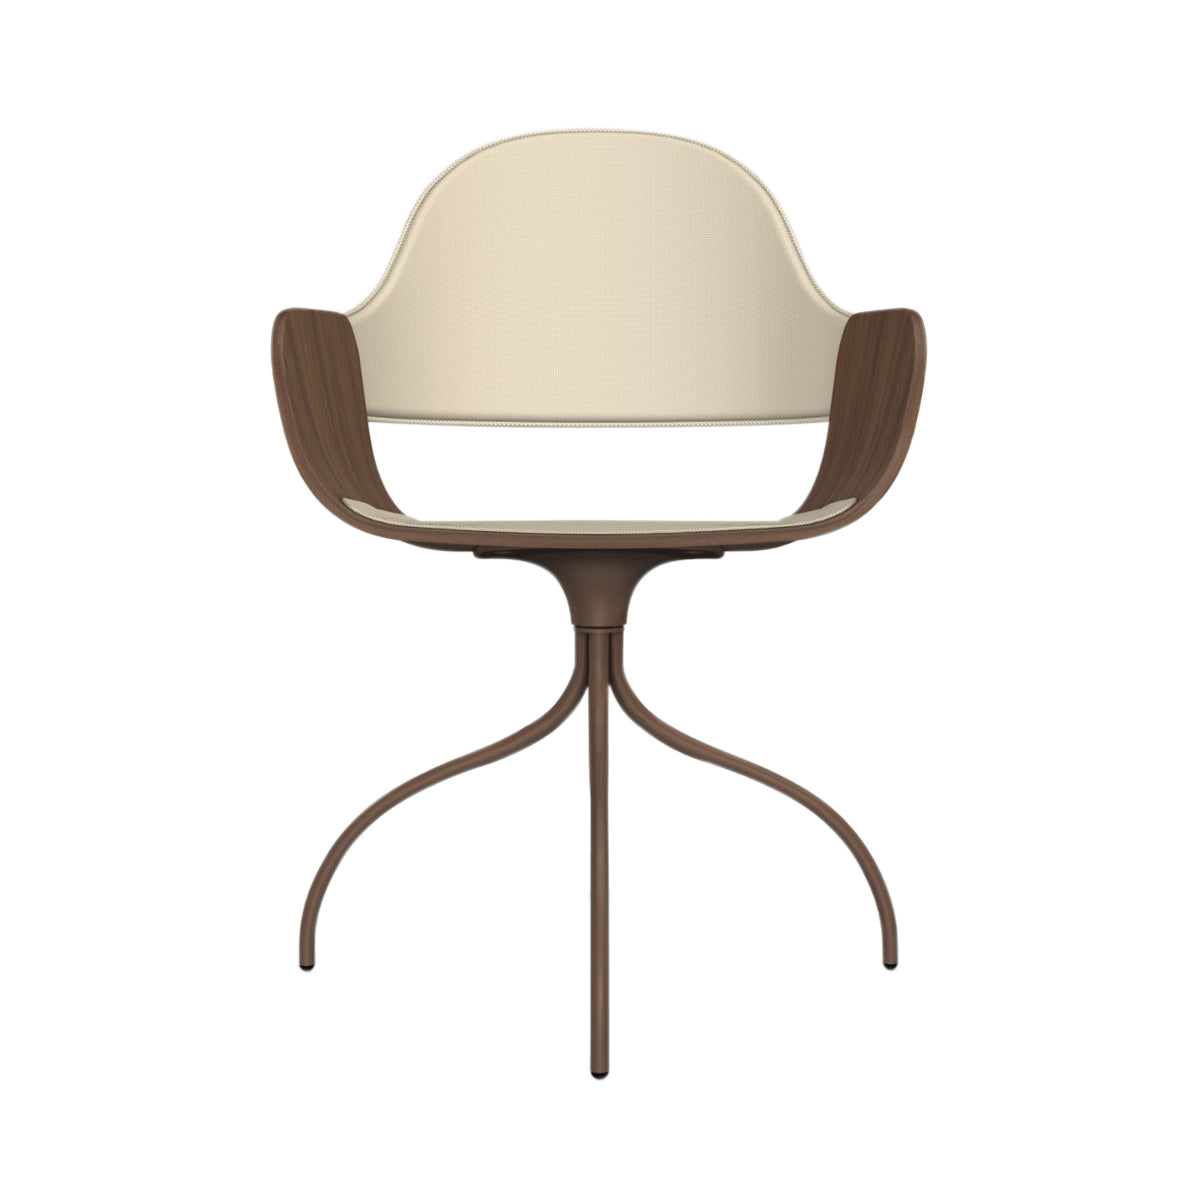 Showtime Nude Chair with Swivel Base: Seat + Backrest Upholstered + Walnut + Pale Brown